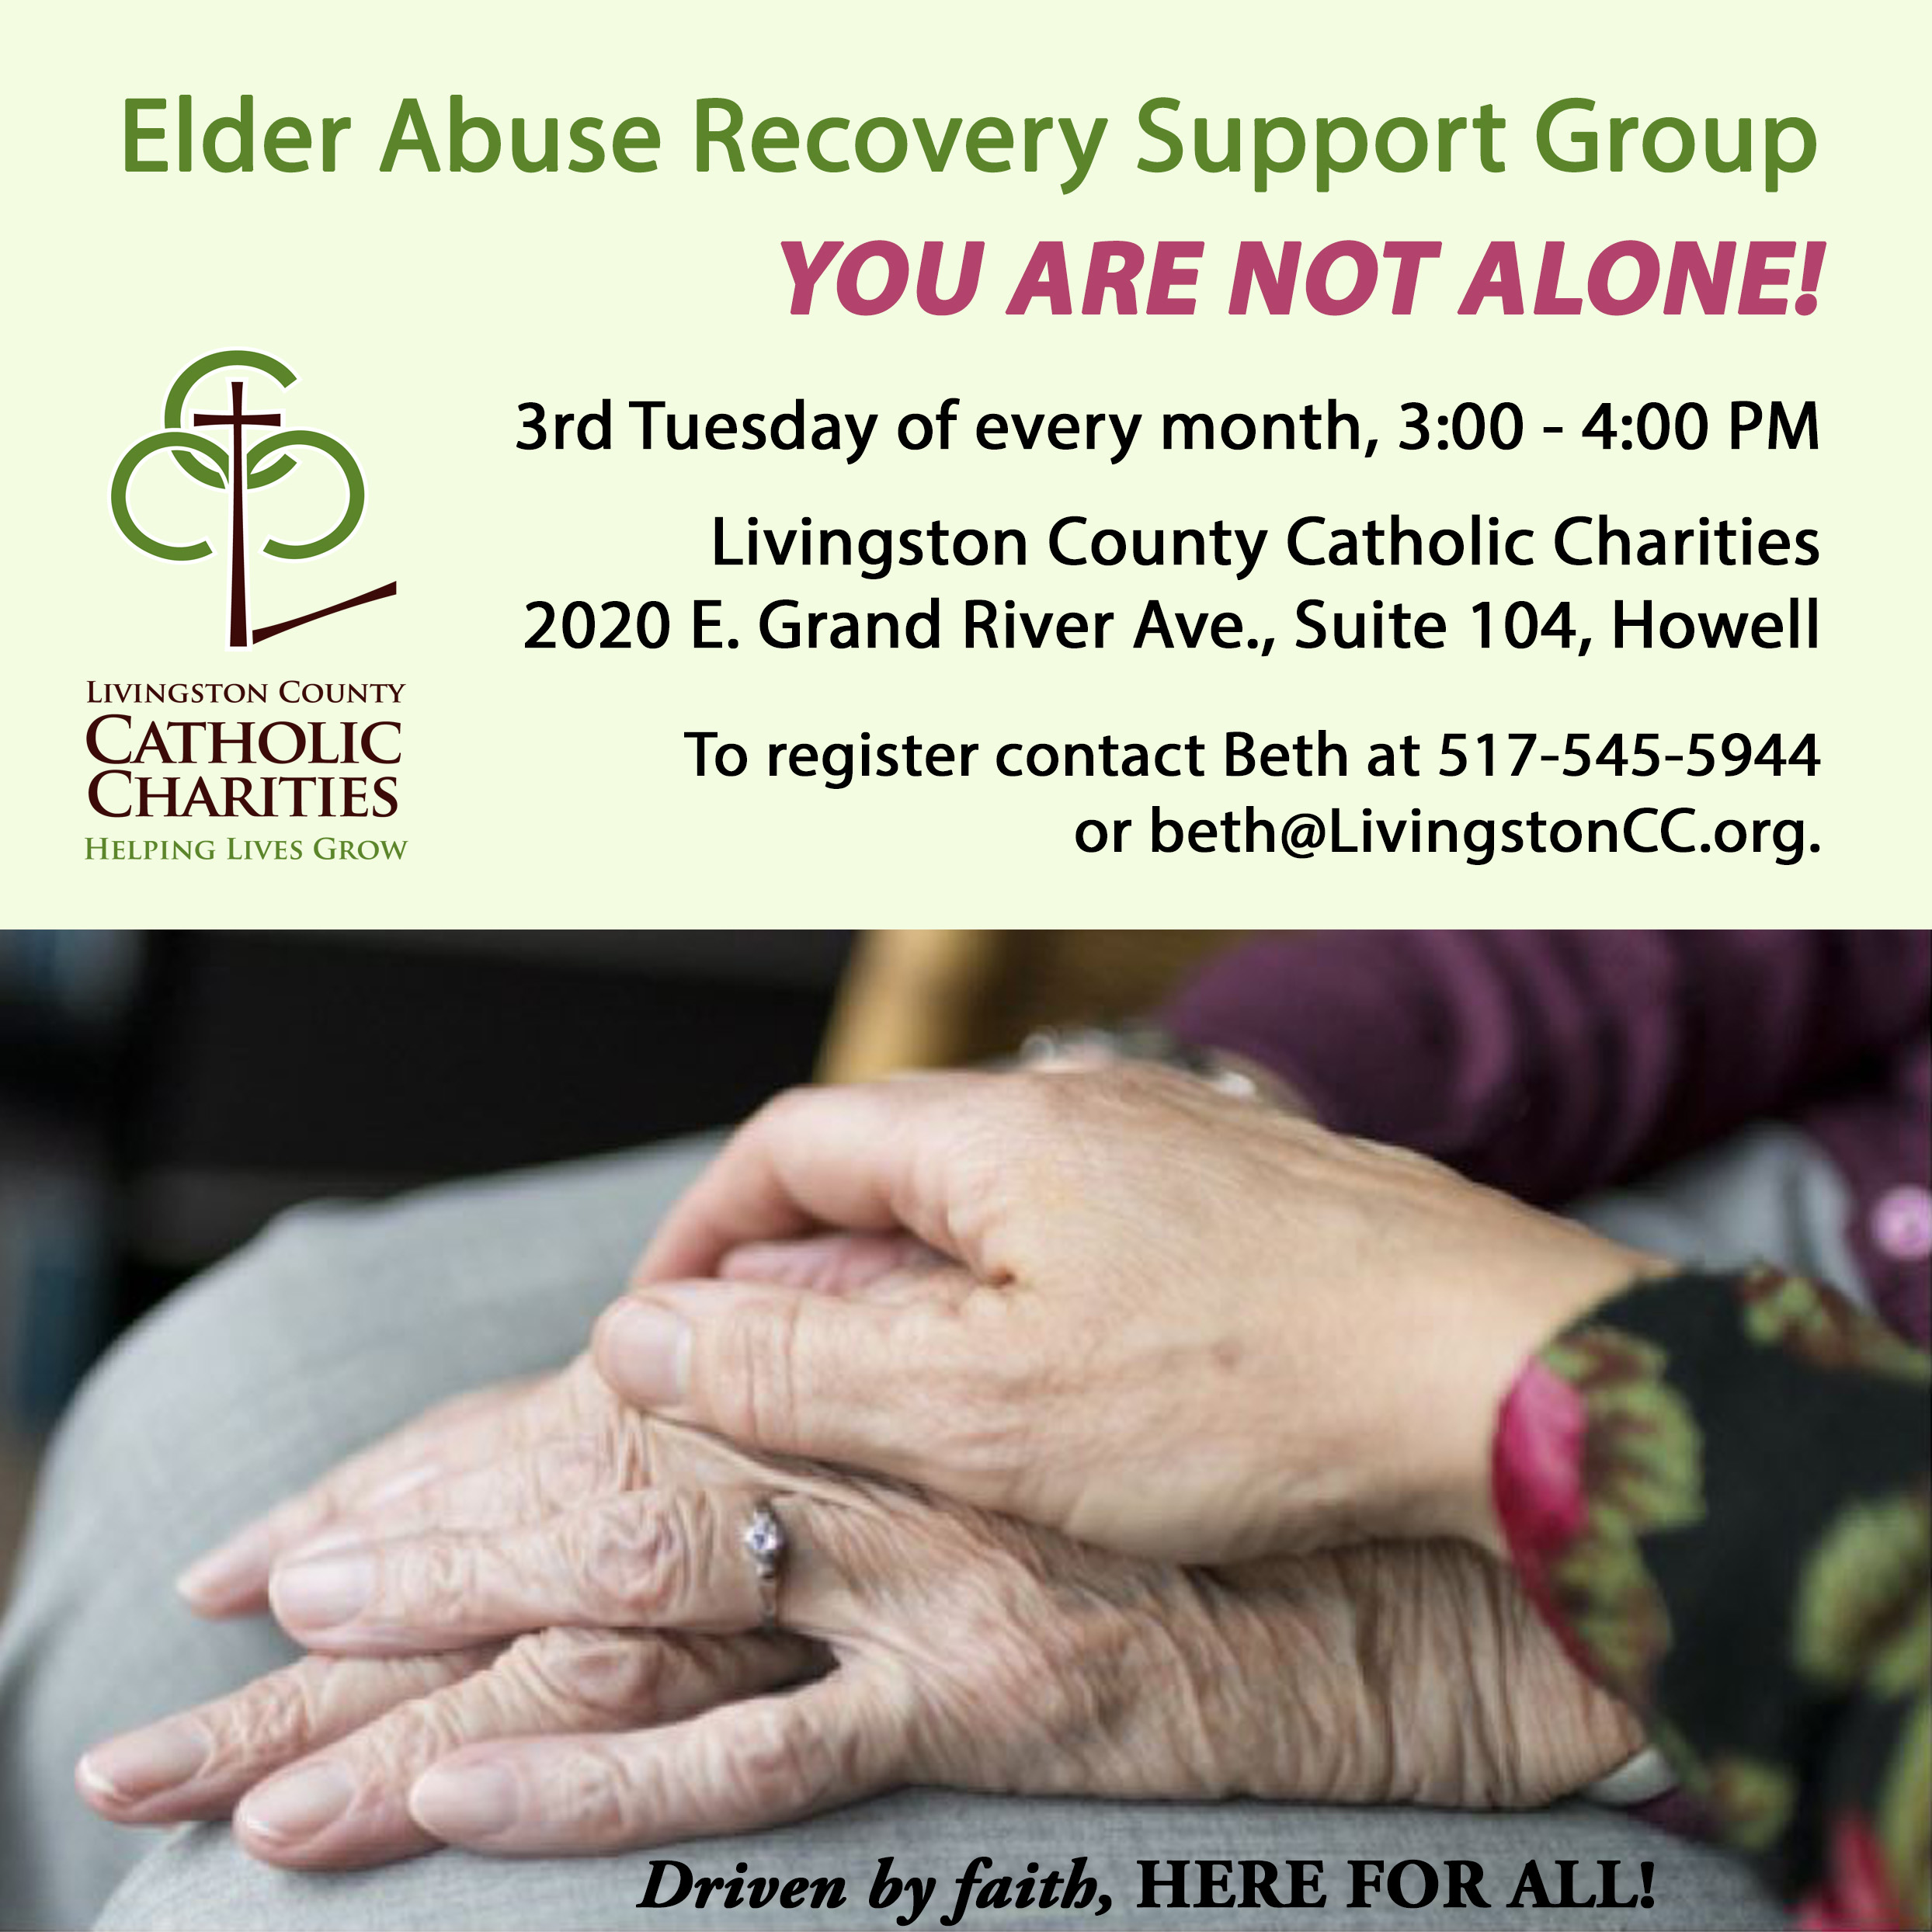 Elder Abuse Recovery Support Group